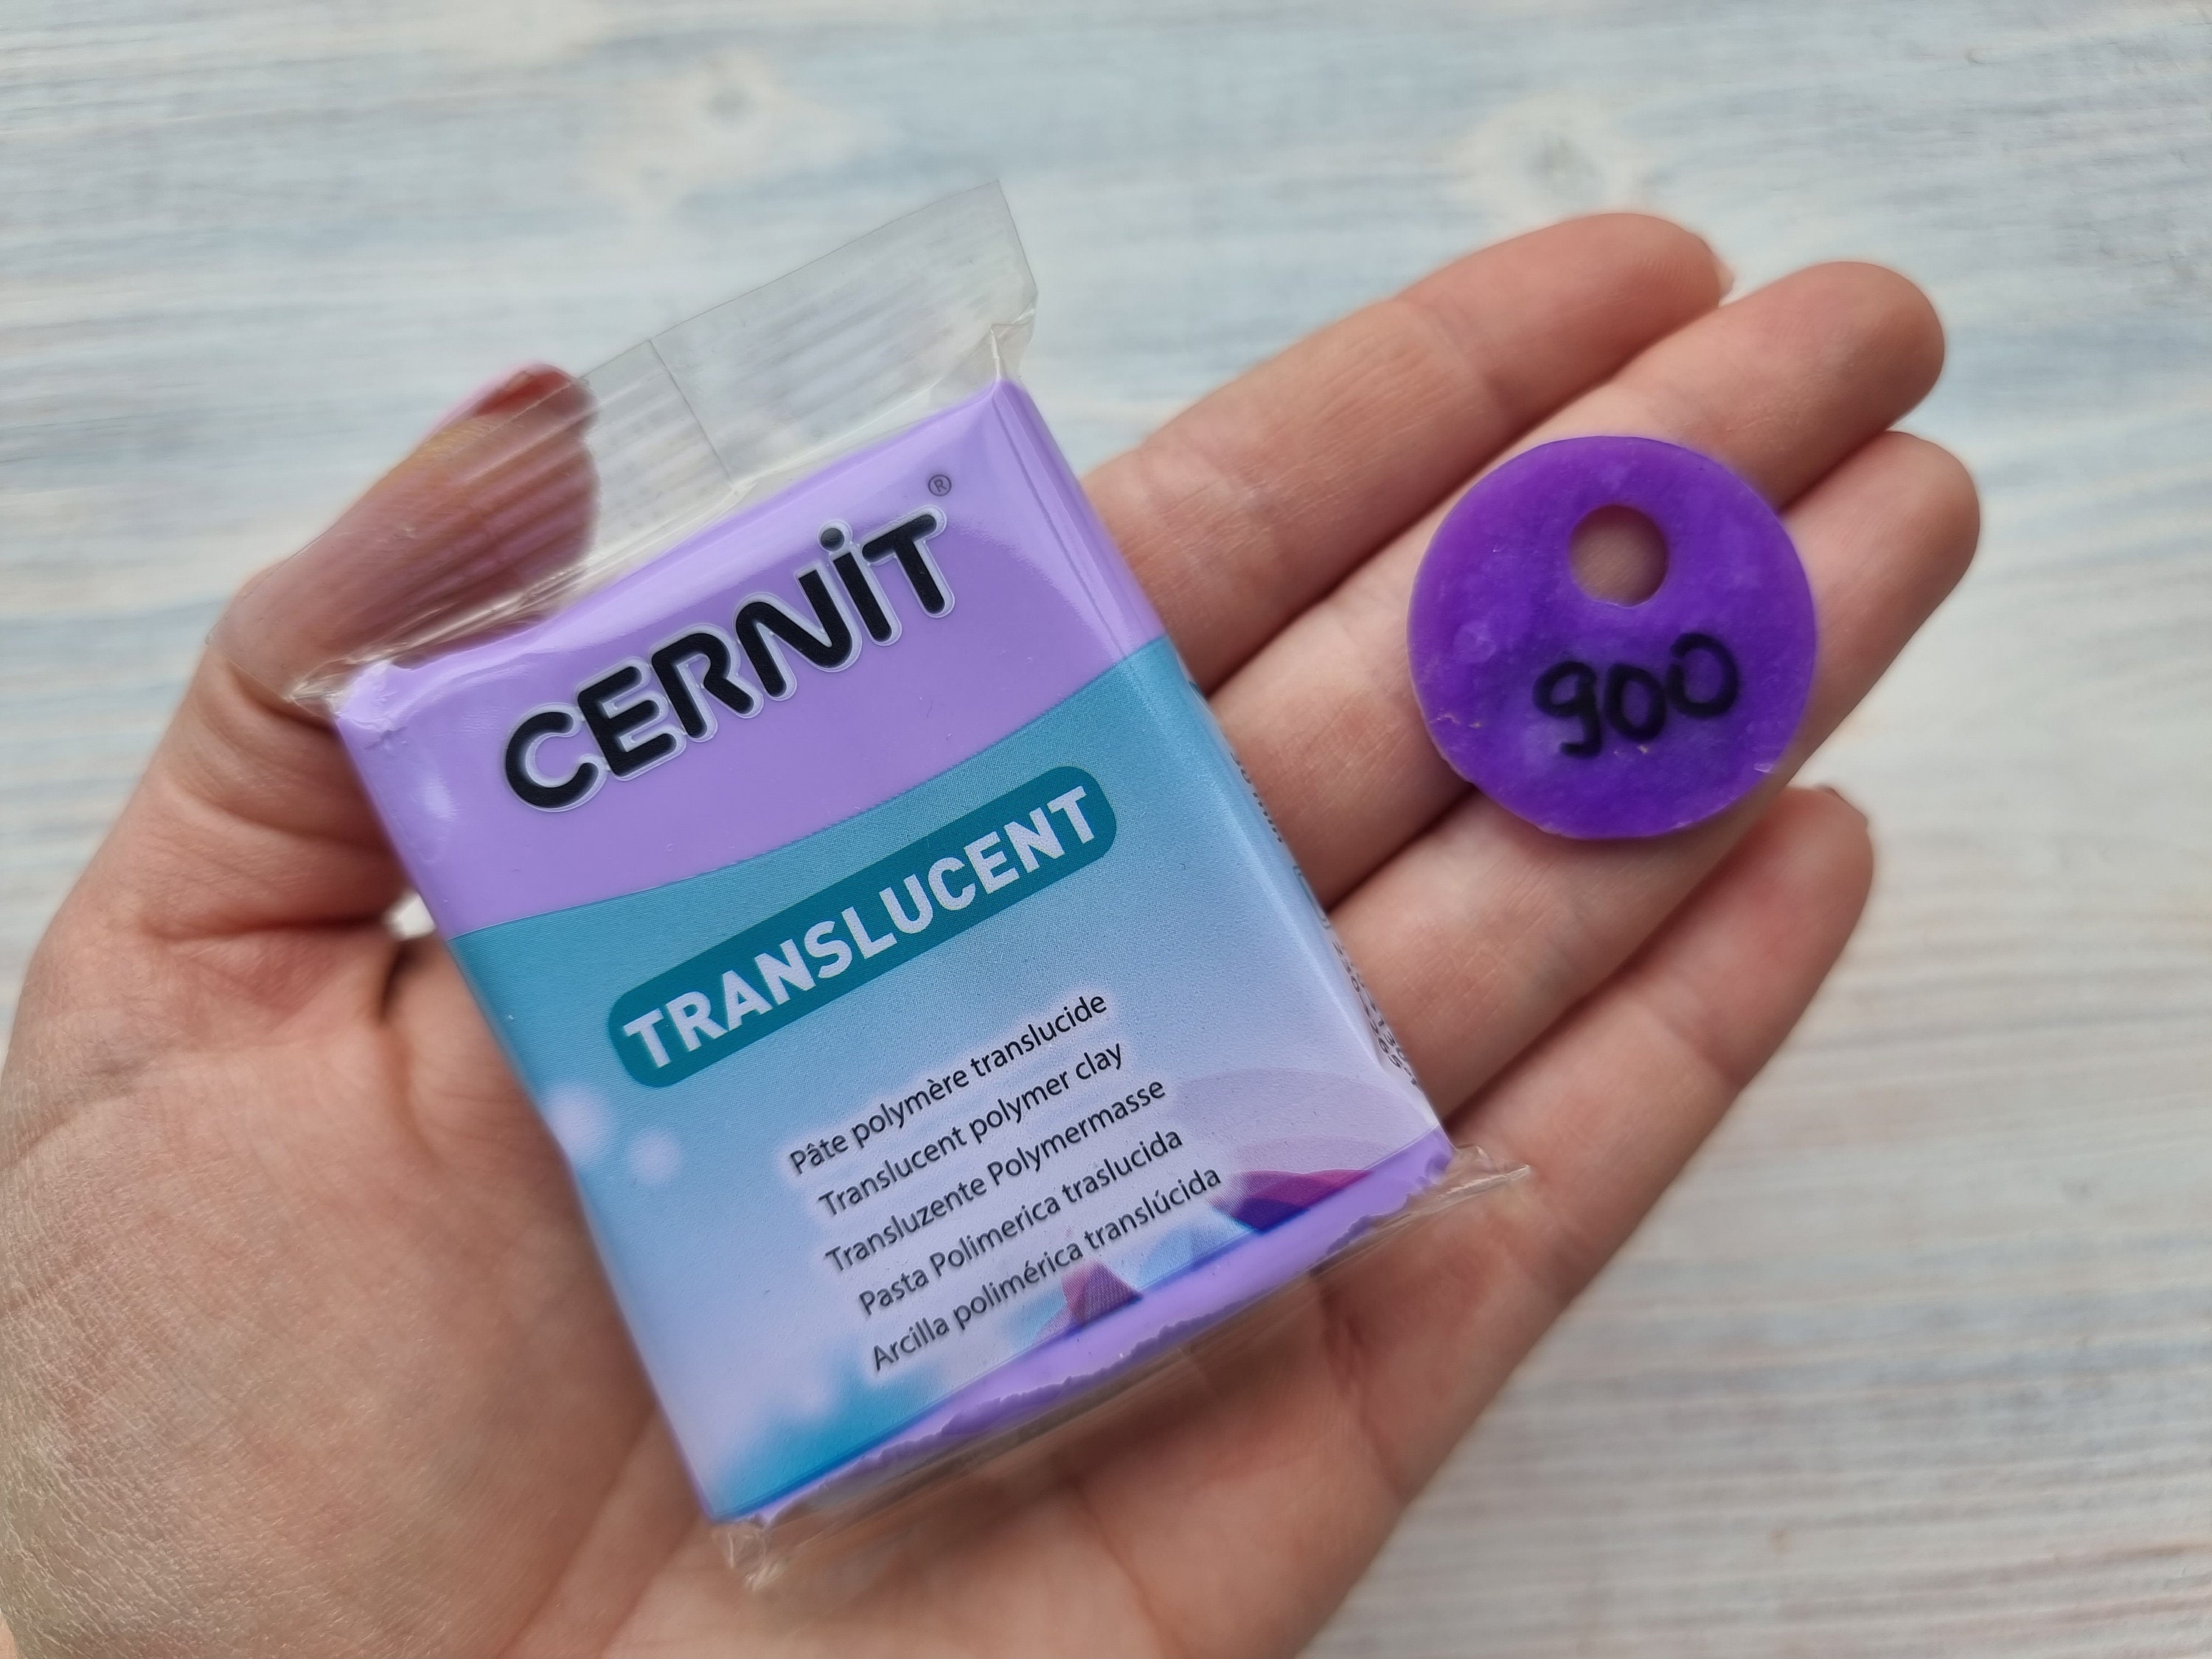 CERNIT Opaline Serie Polymer Clay, White, Nr. 010, 56g 2oz, Oven-hardening  Polymer Modeling Clay 